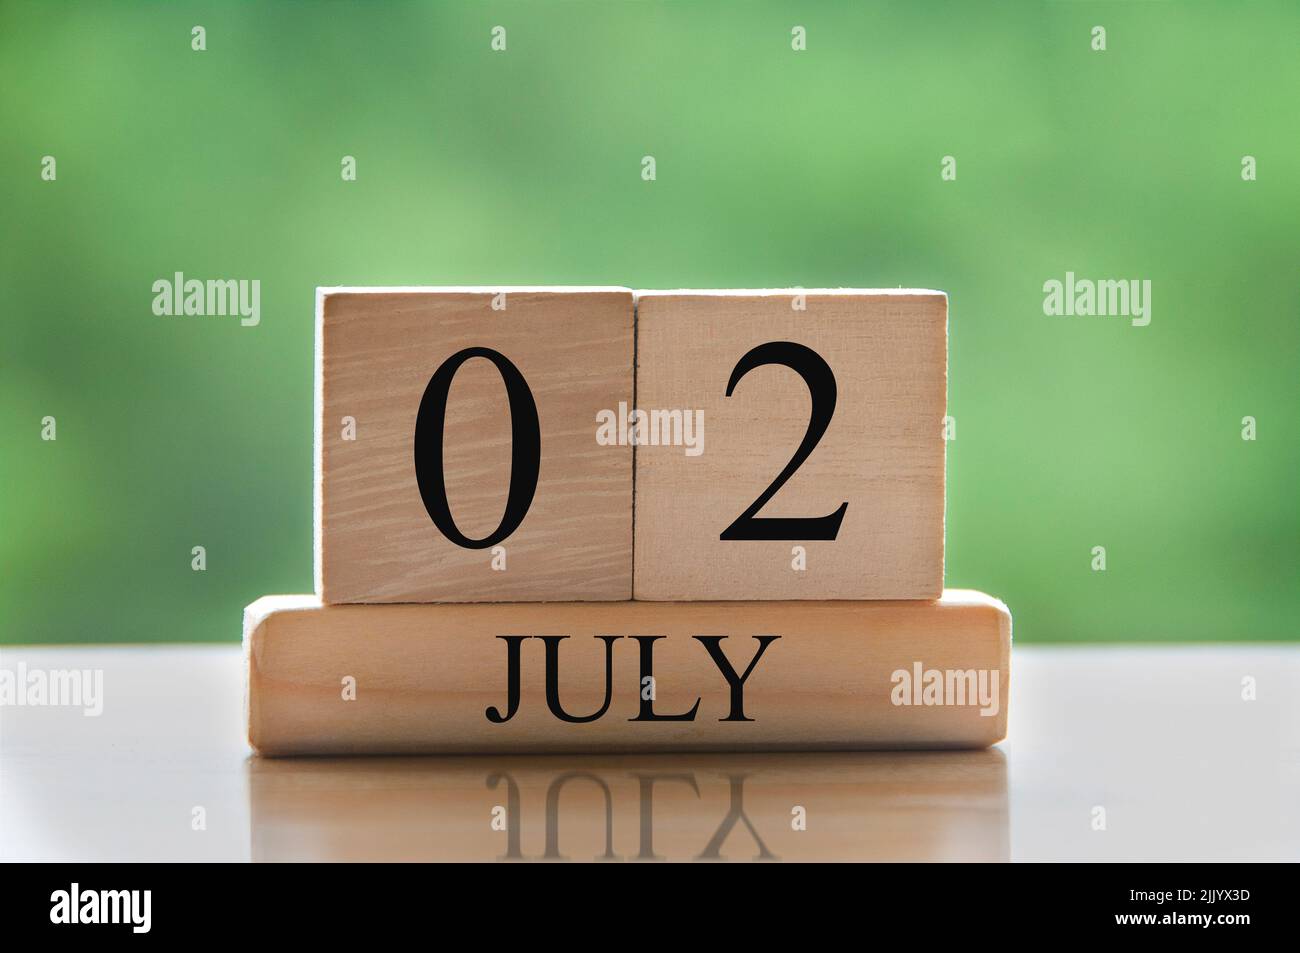 July 2 calendar date text on wooden blocks with blurred background park. Calendar concept Stock Photo